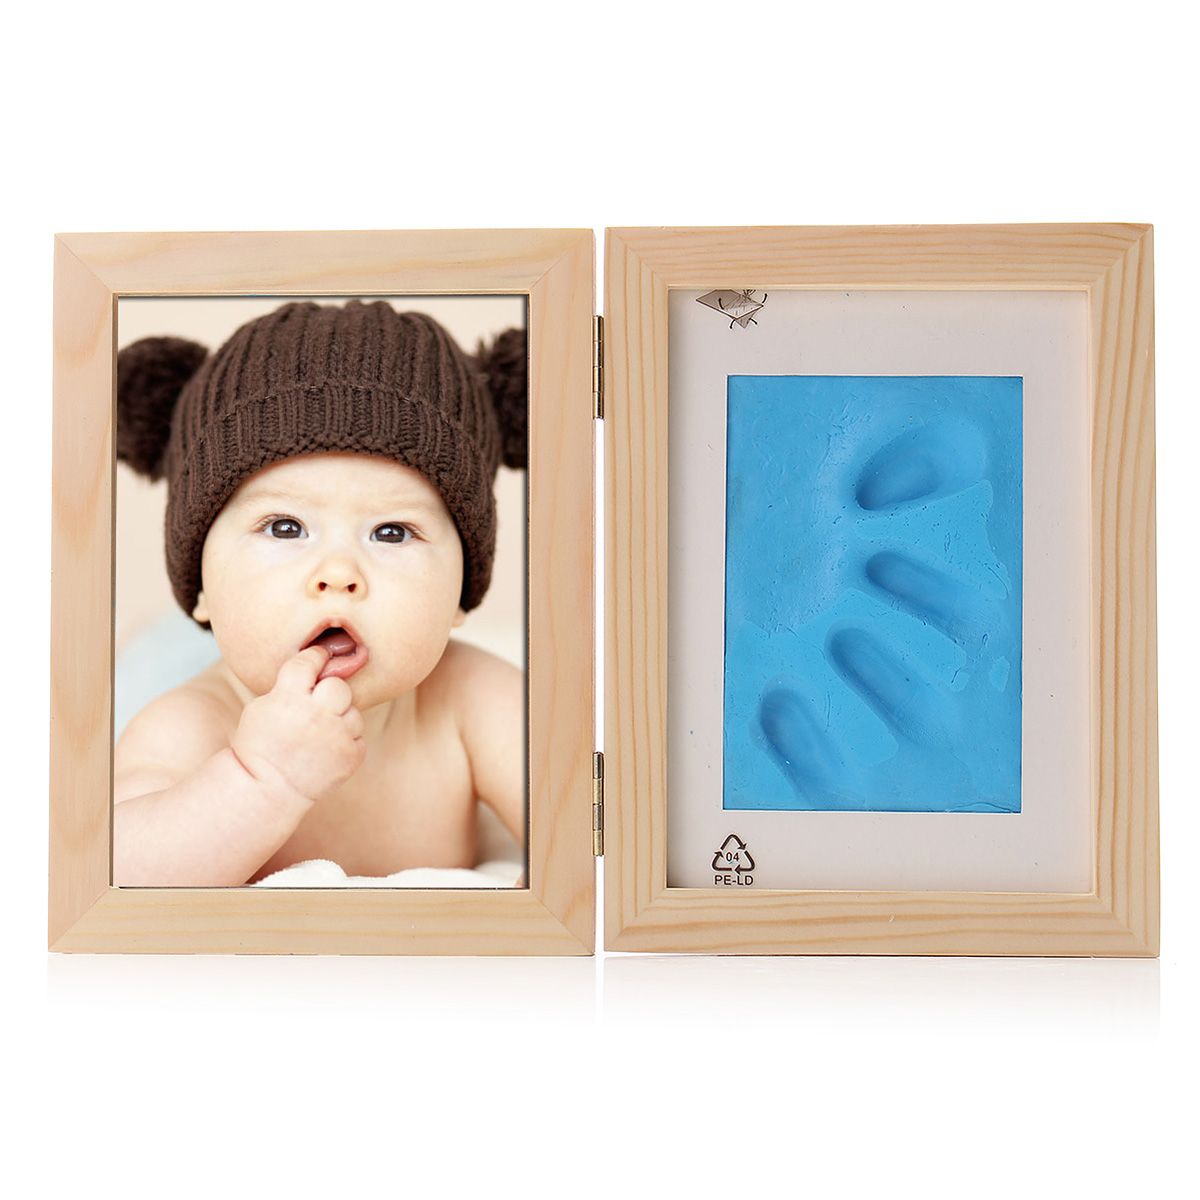 New-Born-Baby-Hand-Foot-Print-Soft-Clay-Photo-Frame-1632981